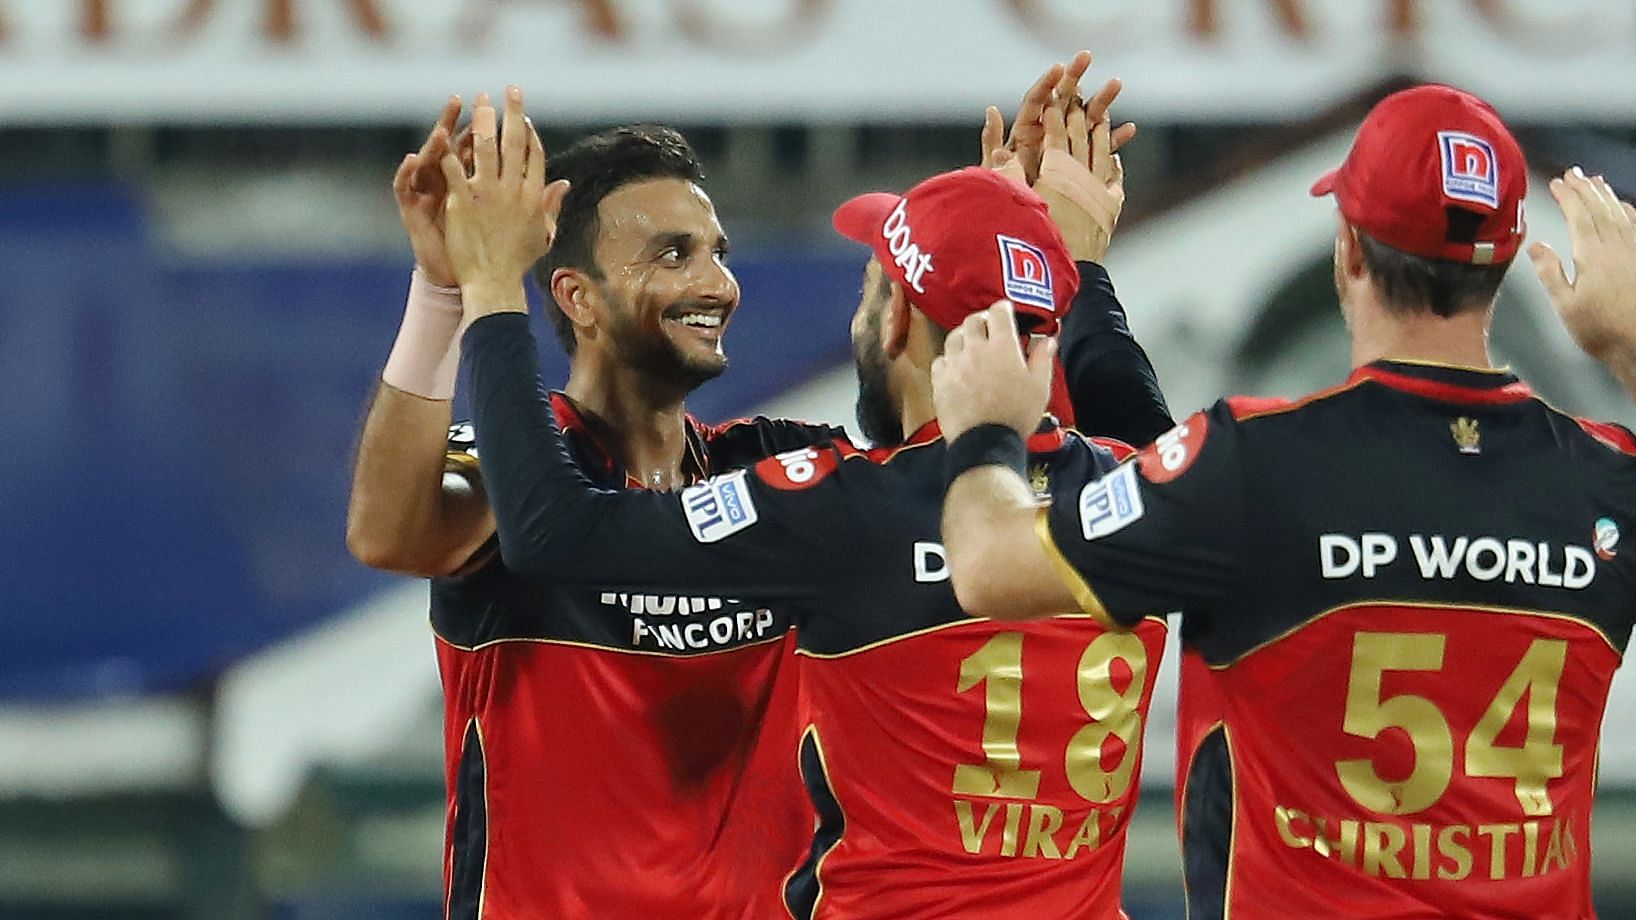 Harshal Patel celebrates one of his five wickets in the 2021 IPL season-opener against Mumbai Indians.